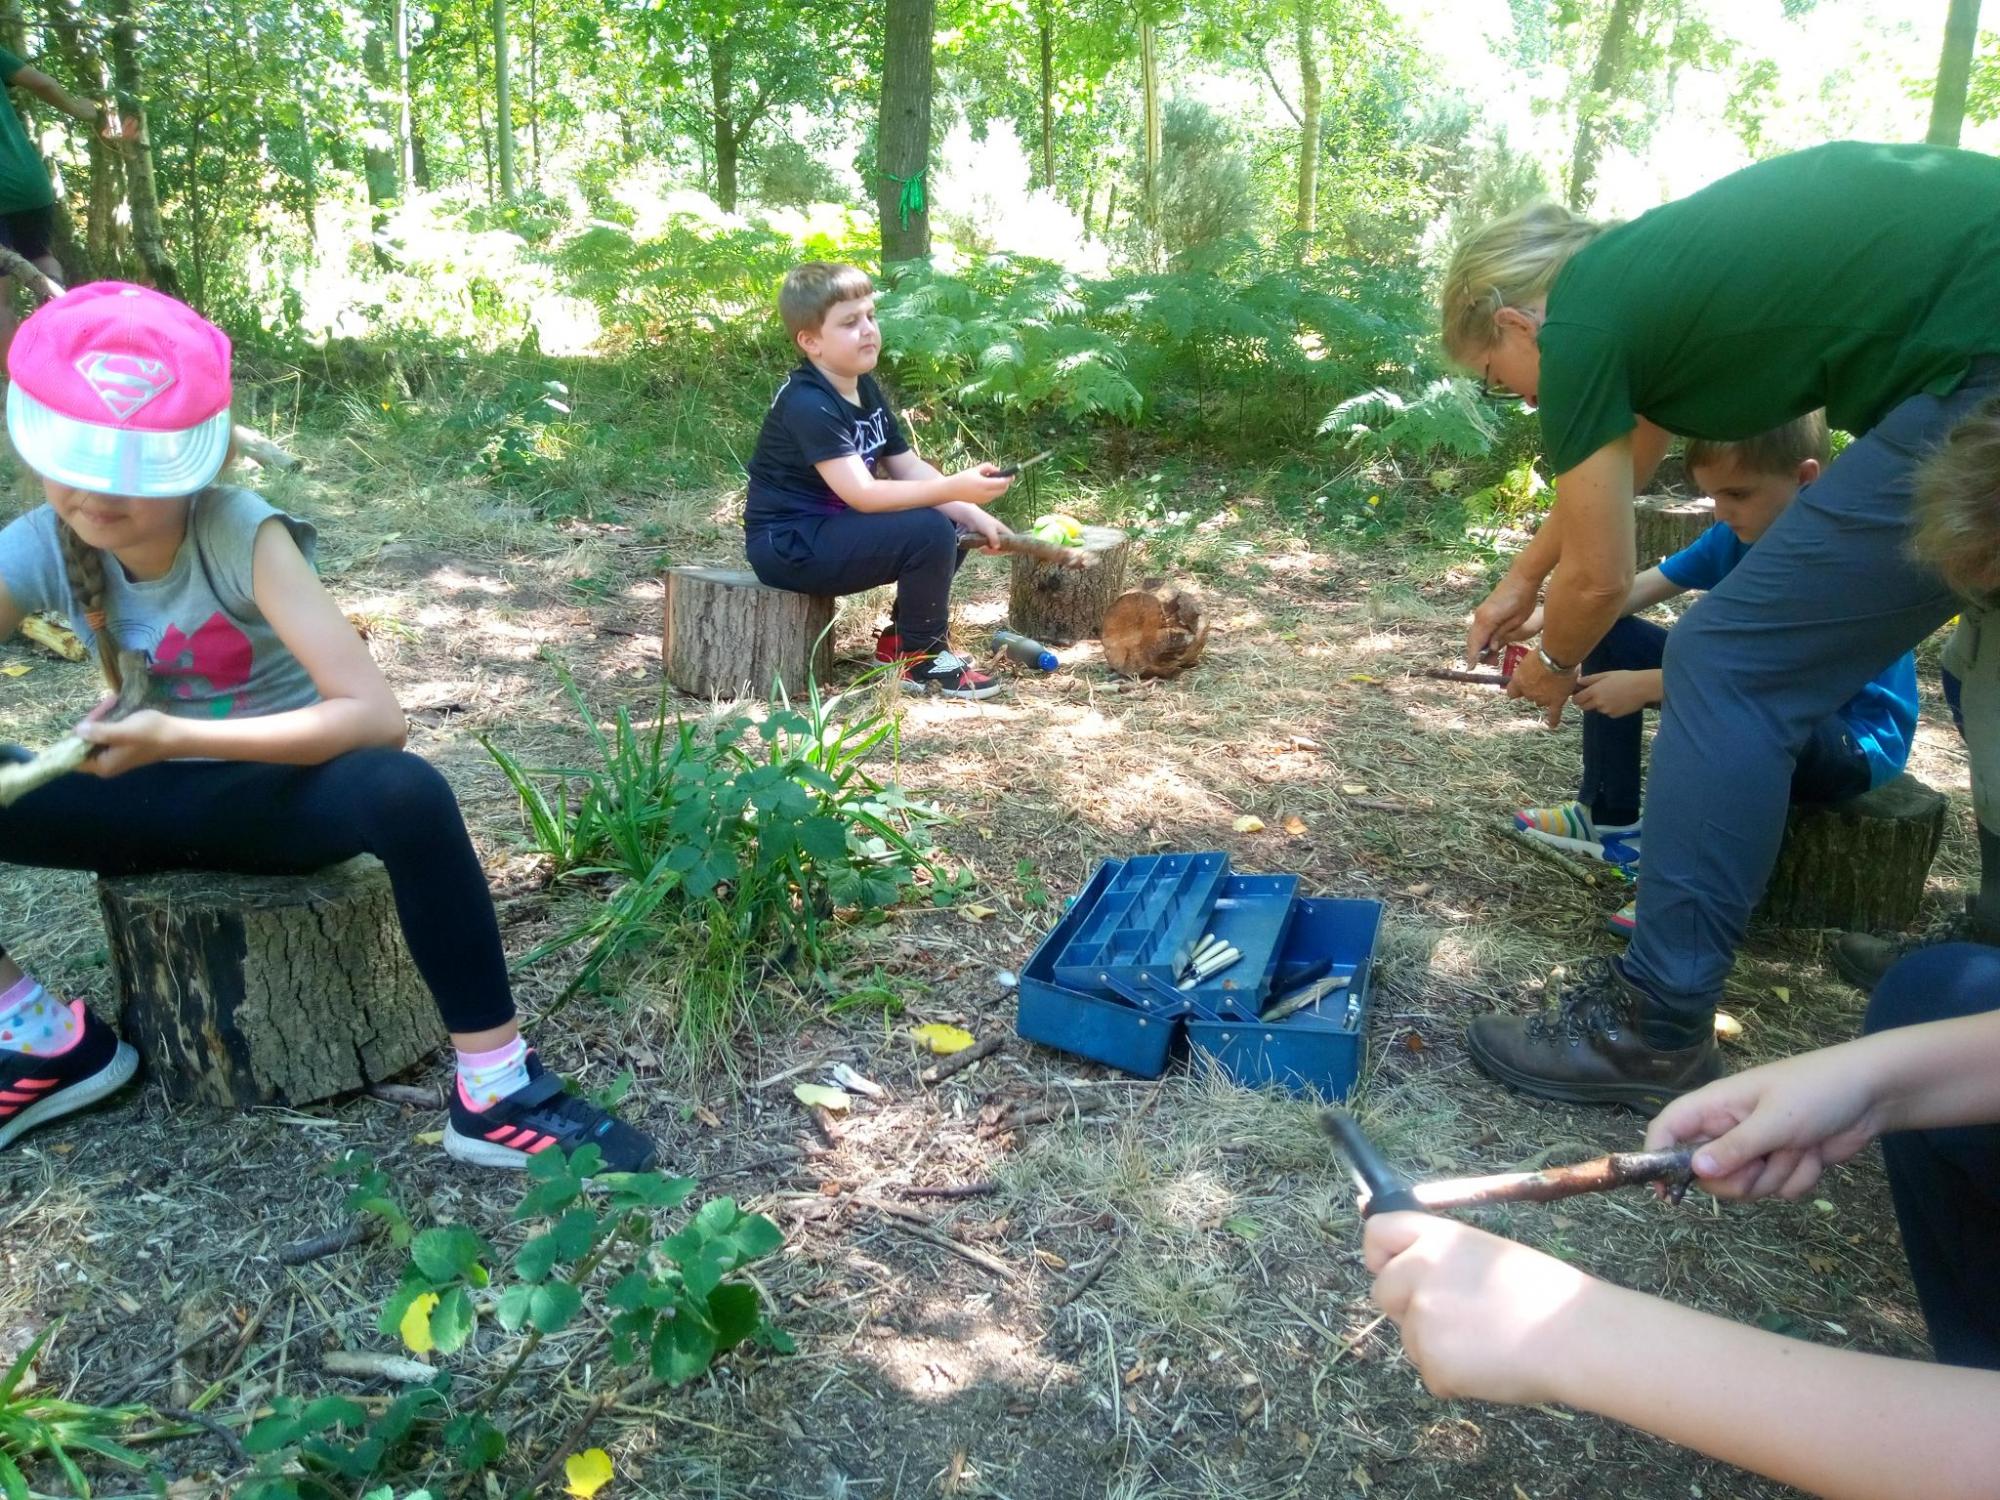 Children sitting on stumps in the woodland whittling